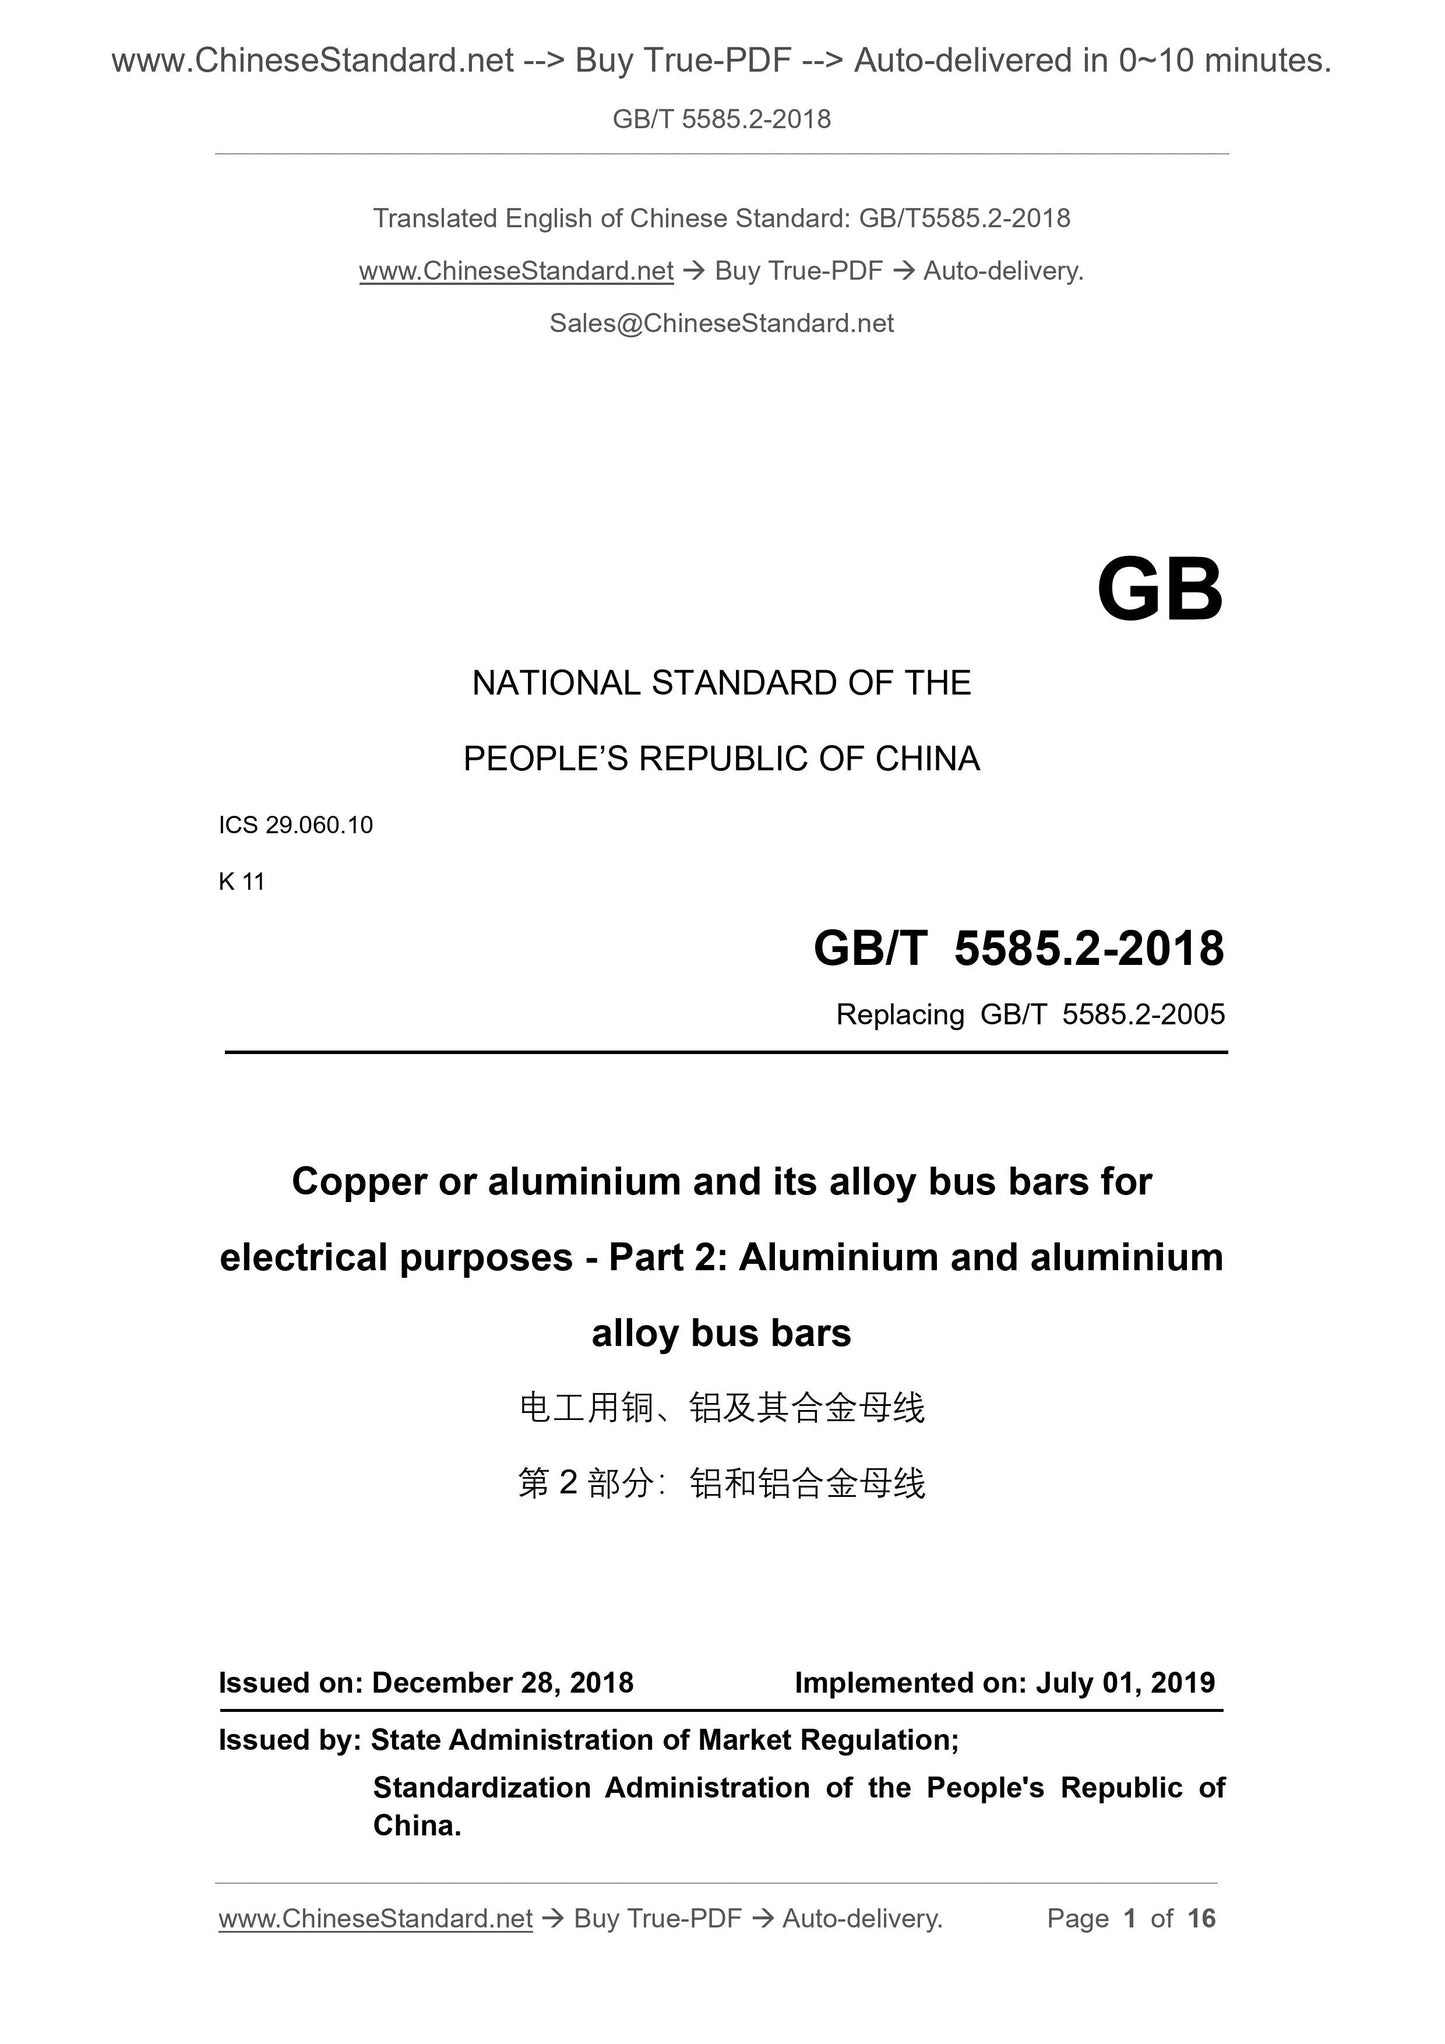 GB/T 5585.2-2018 Page 1